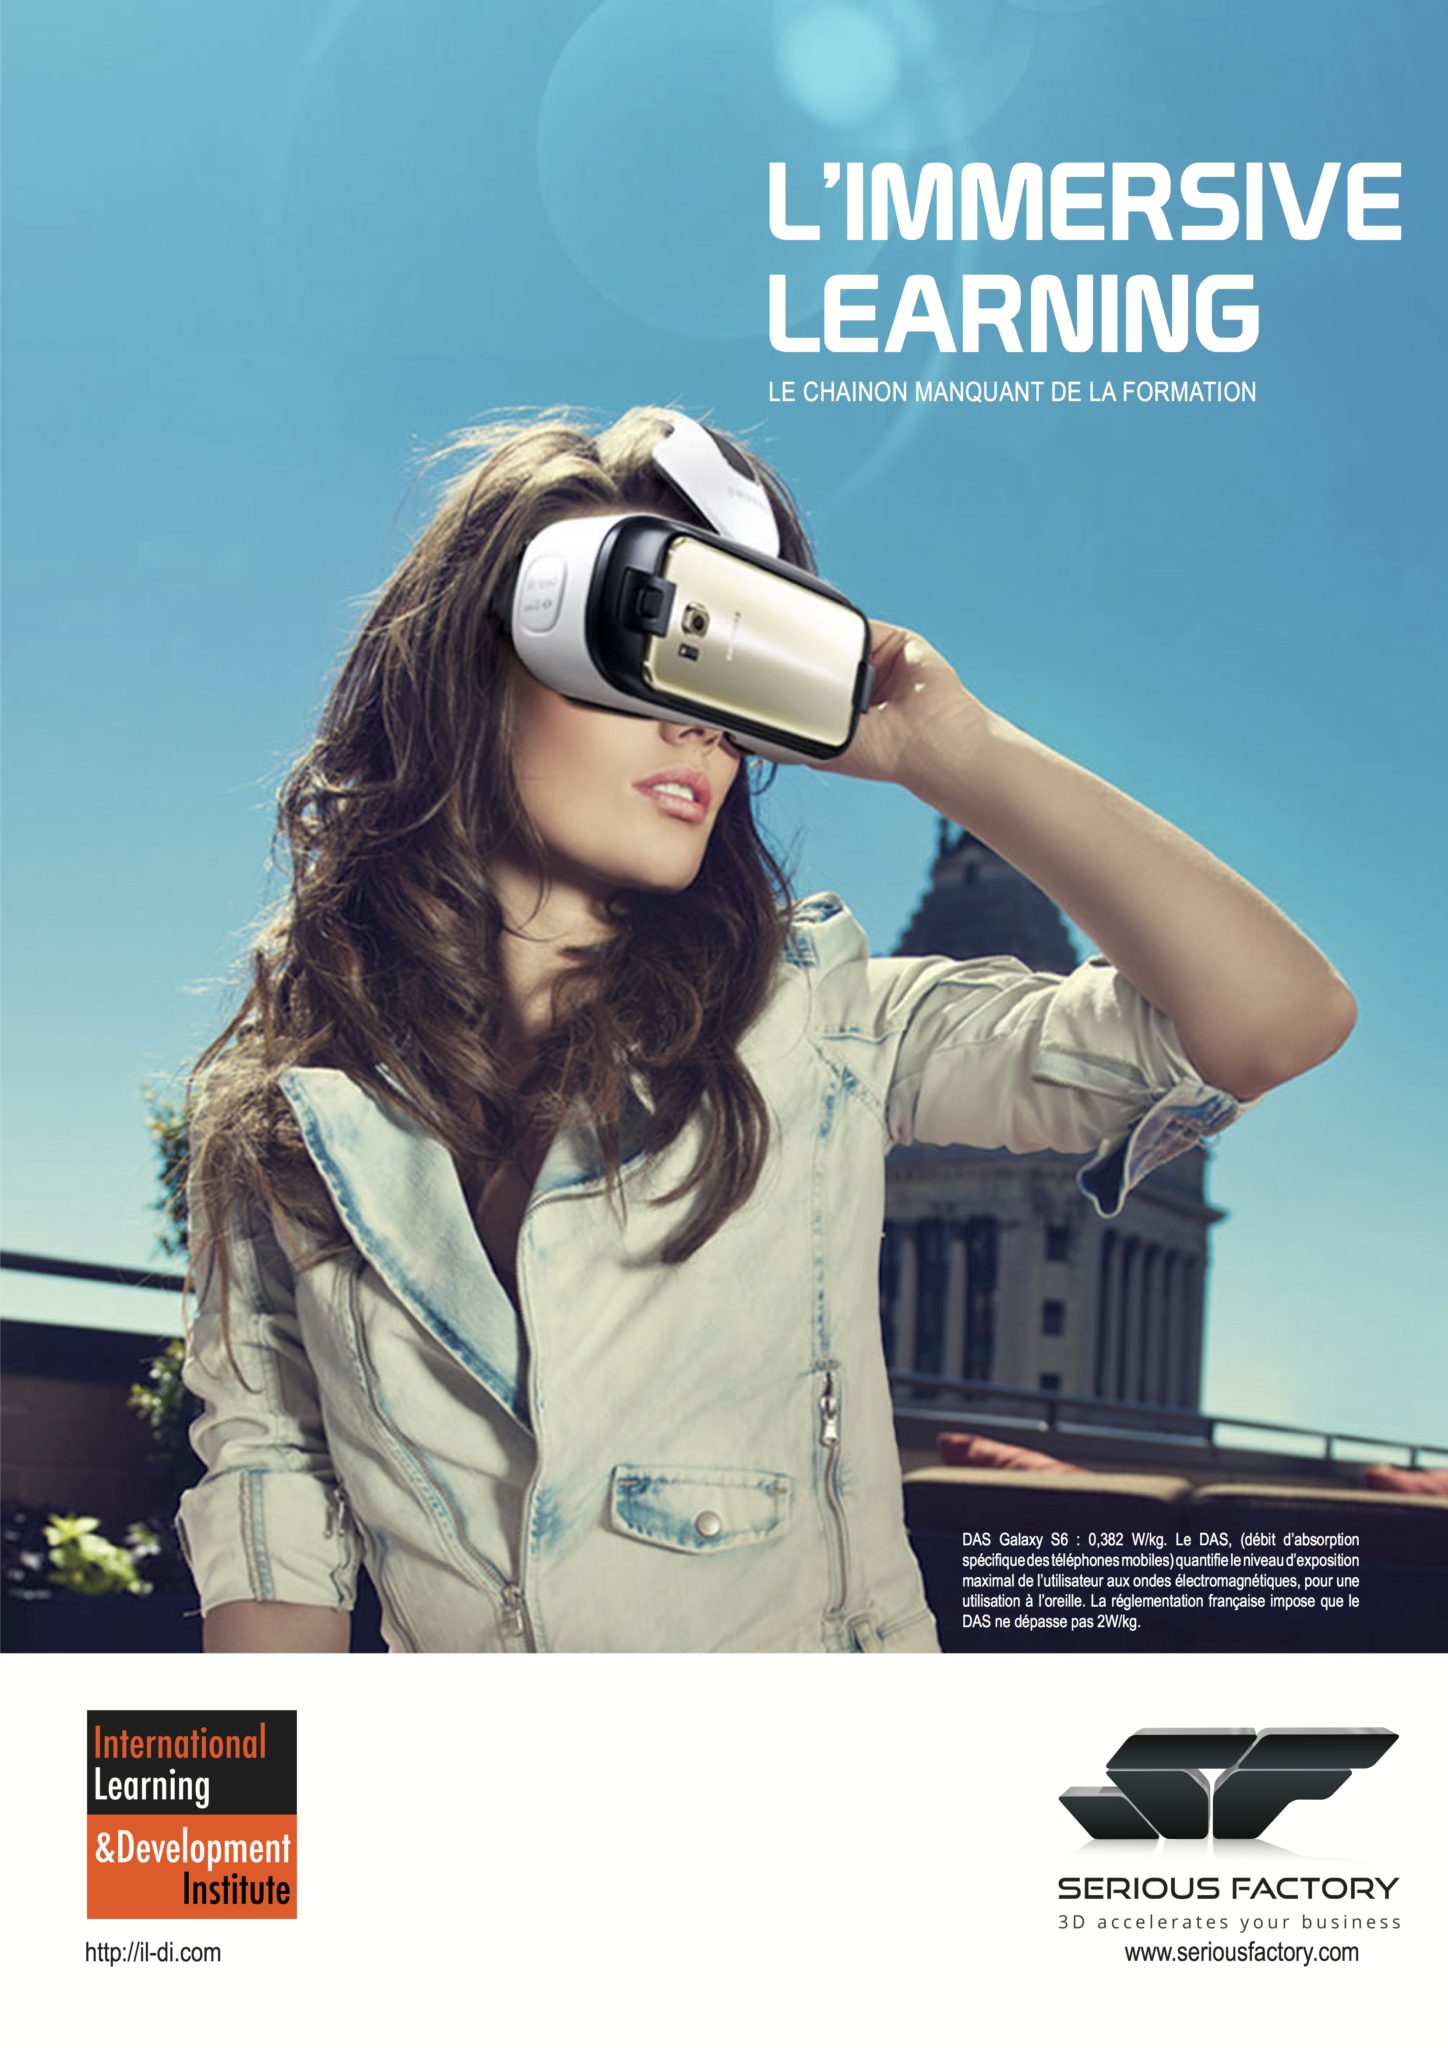 L’Immersive Learning